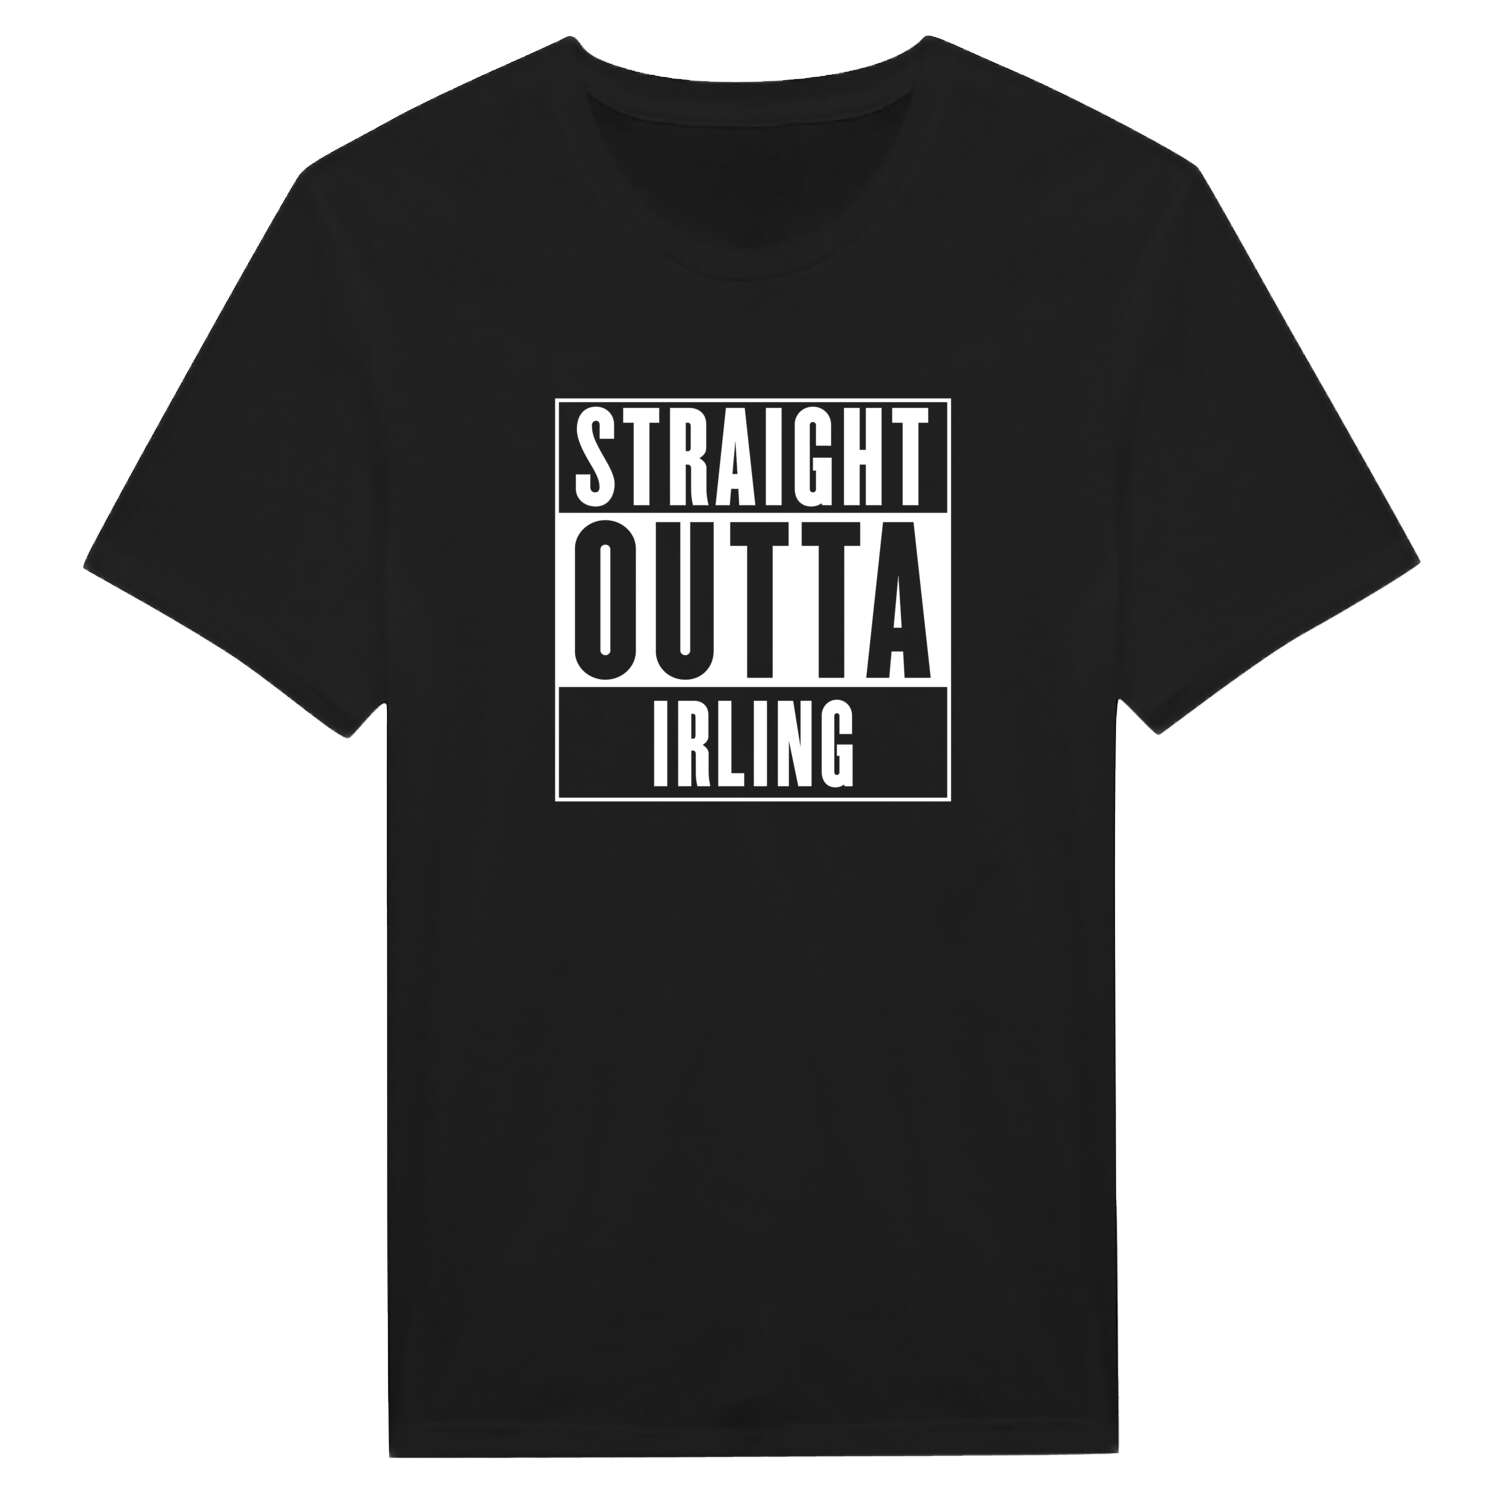 Irling T-Shirt »Straight Outta«